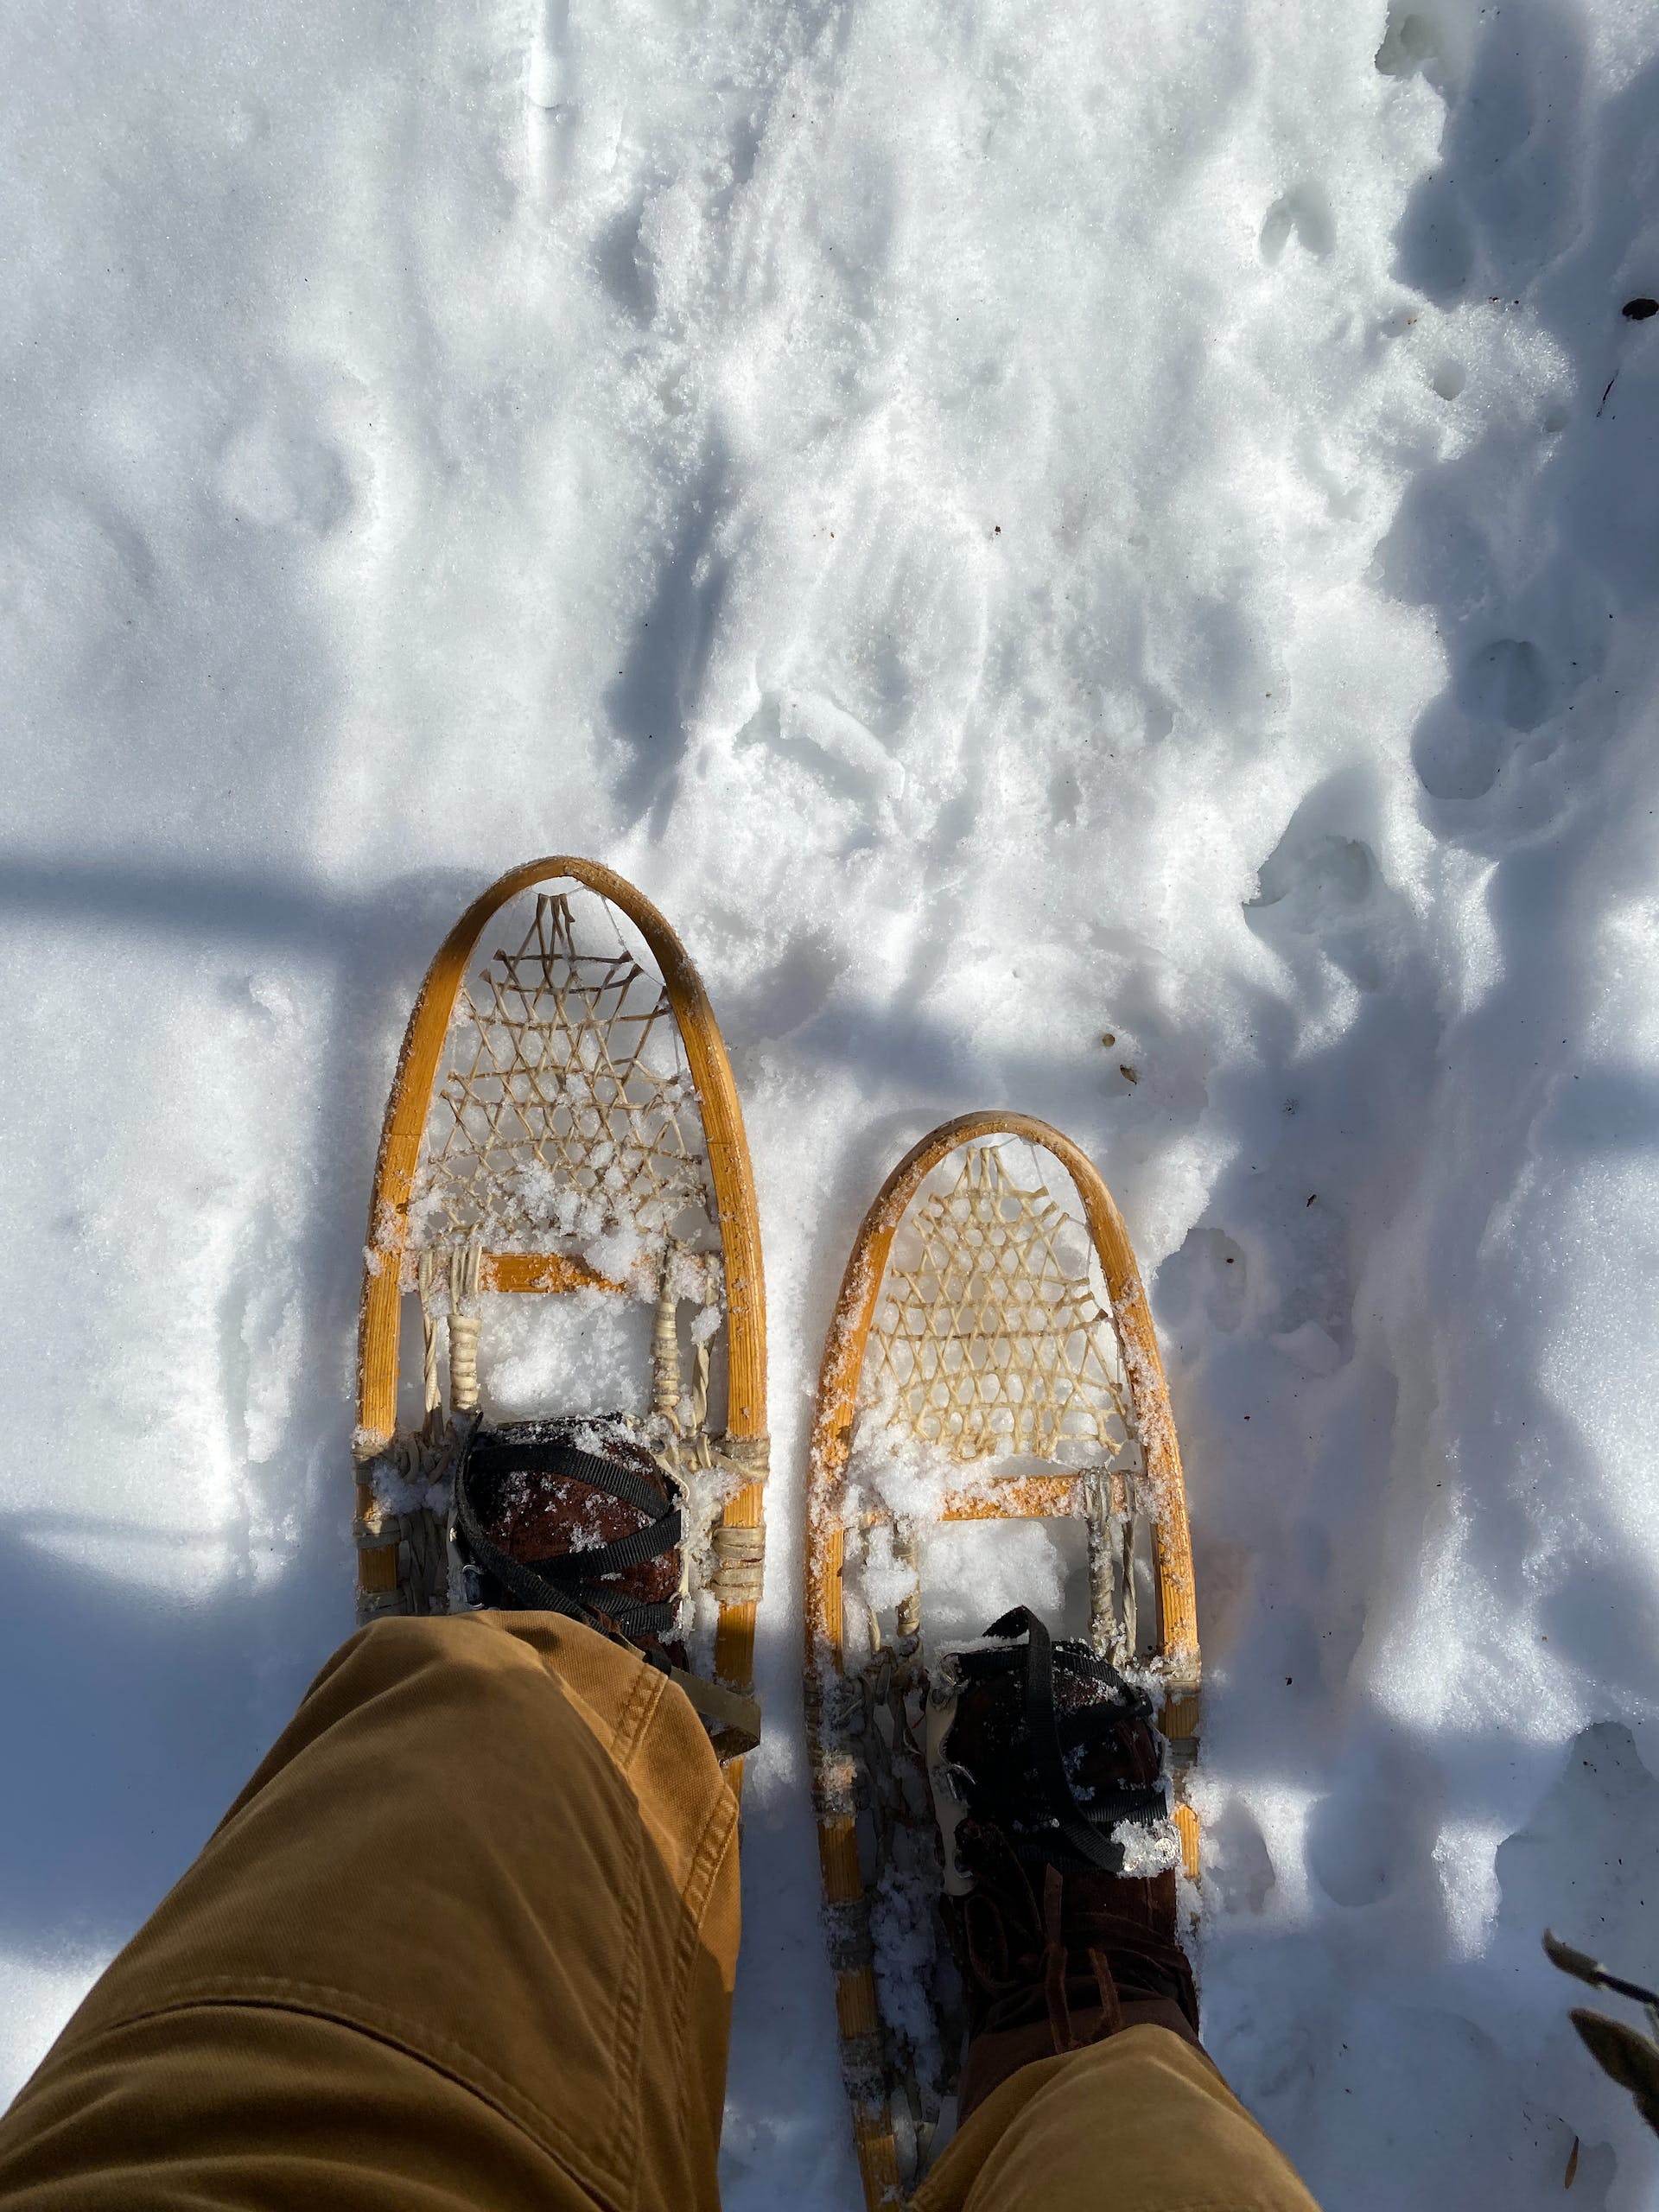 A person wearing snowshoes | Source: Pexels